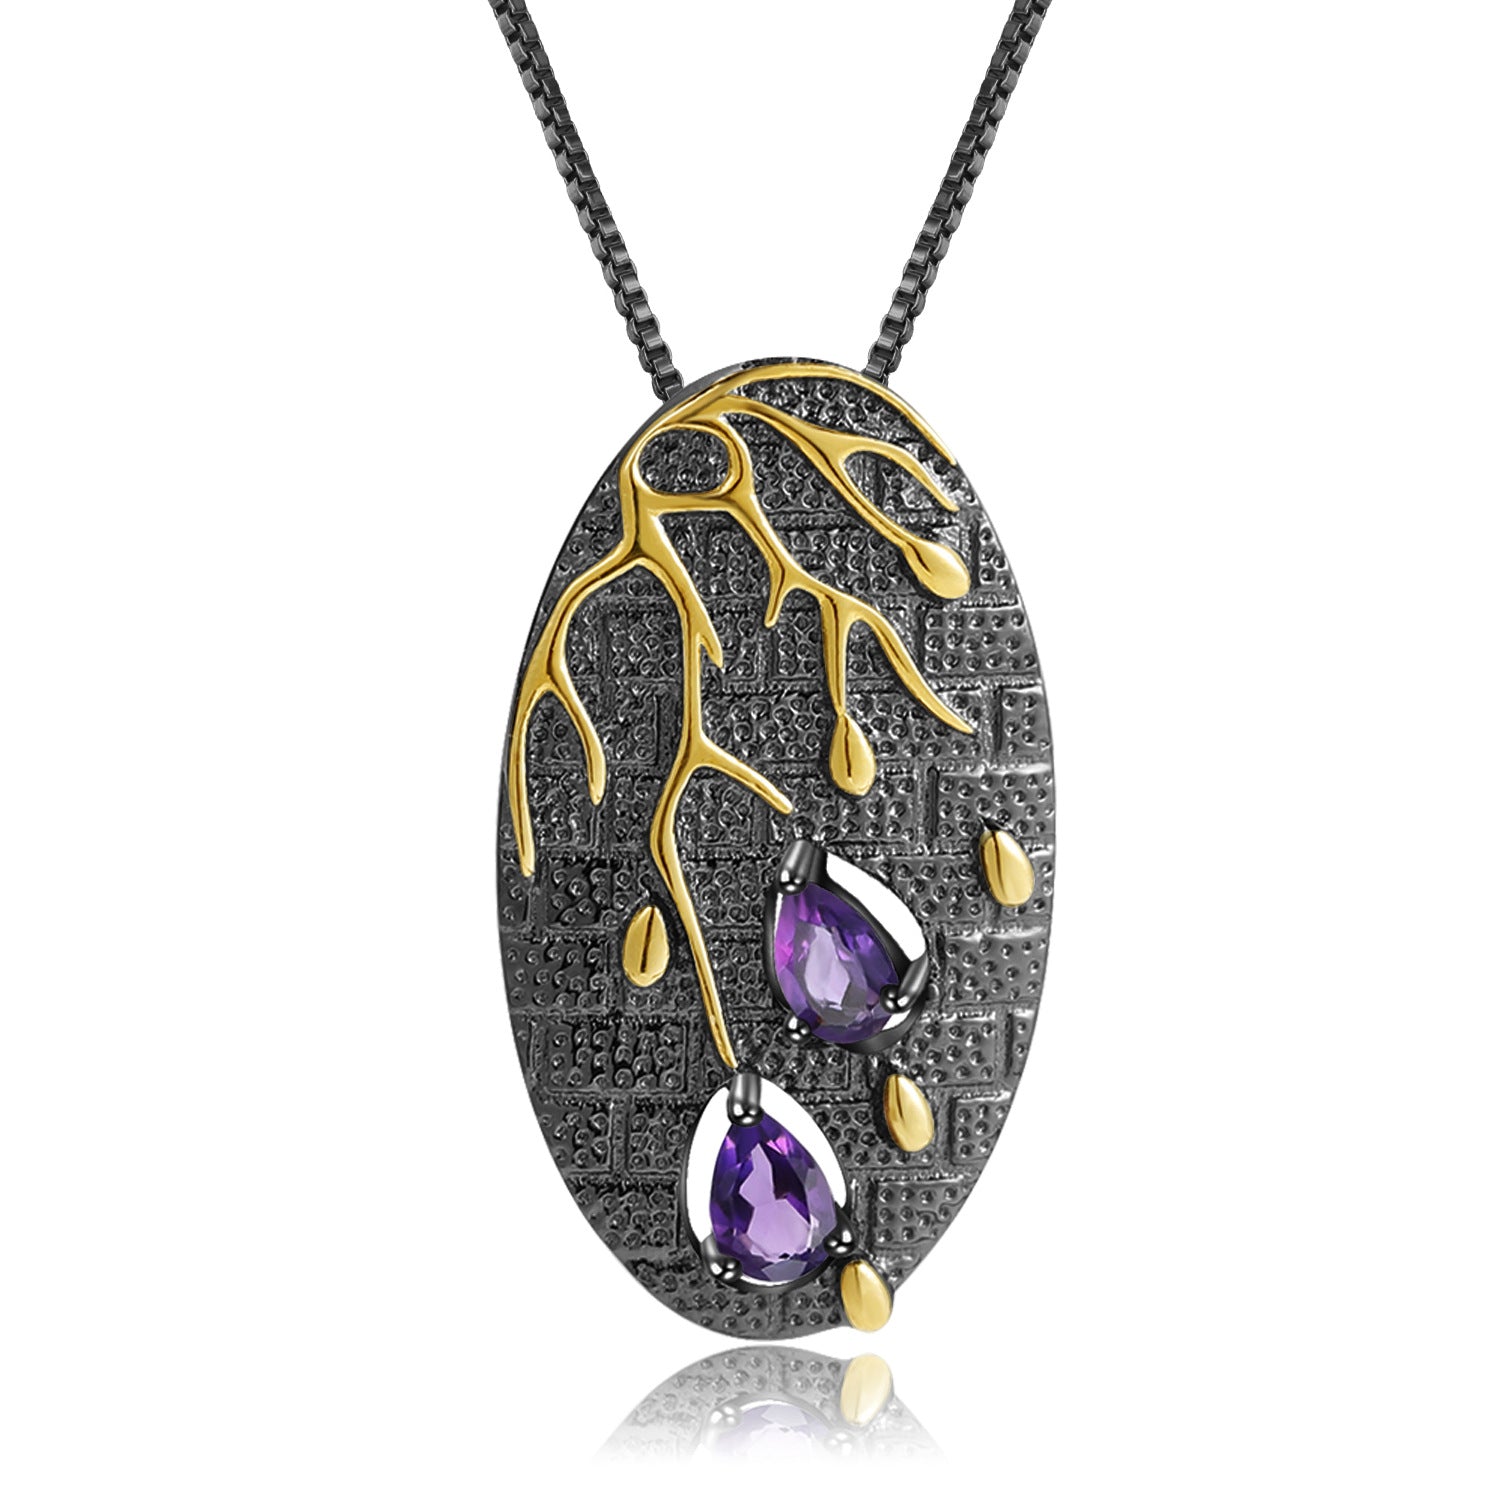 Georgia Premium Colourful Design Natural Gemstone Oval Pendant Sterling Silver Necklace for Women